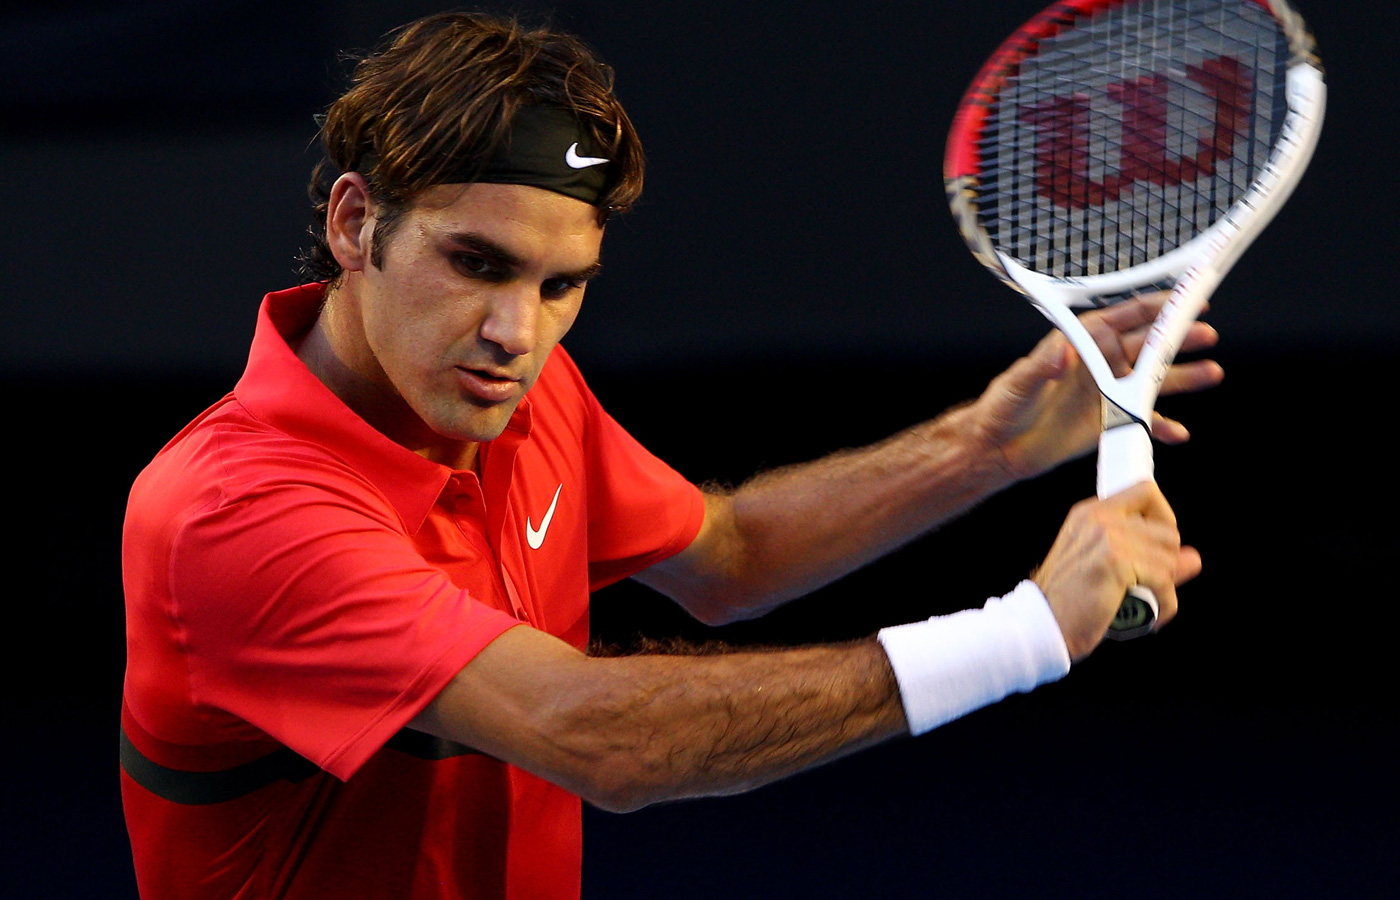 Search Great Tennis Wallpapers Roger Federer Hd Wallpapers for Free